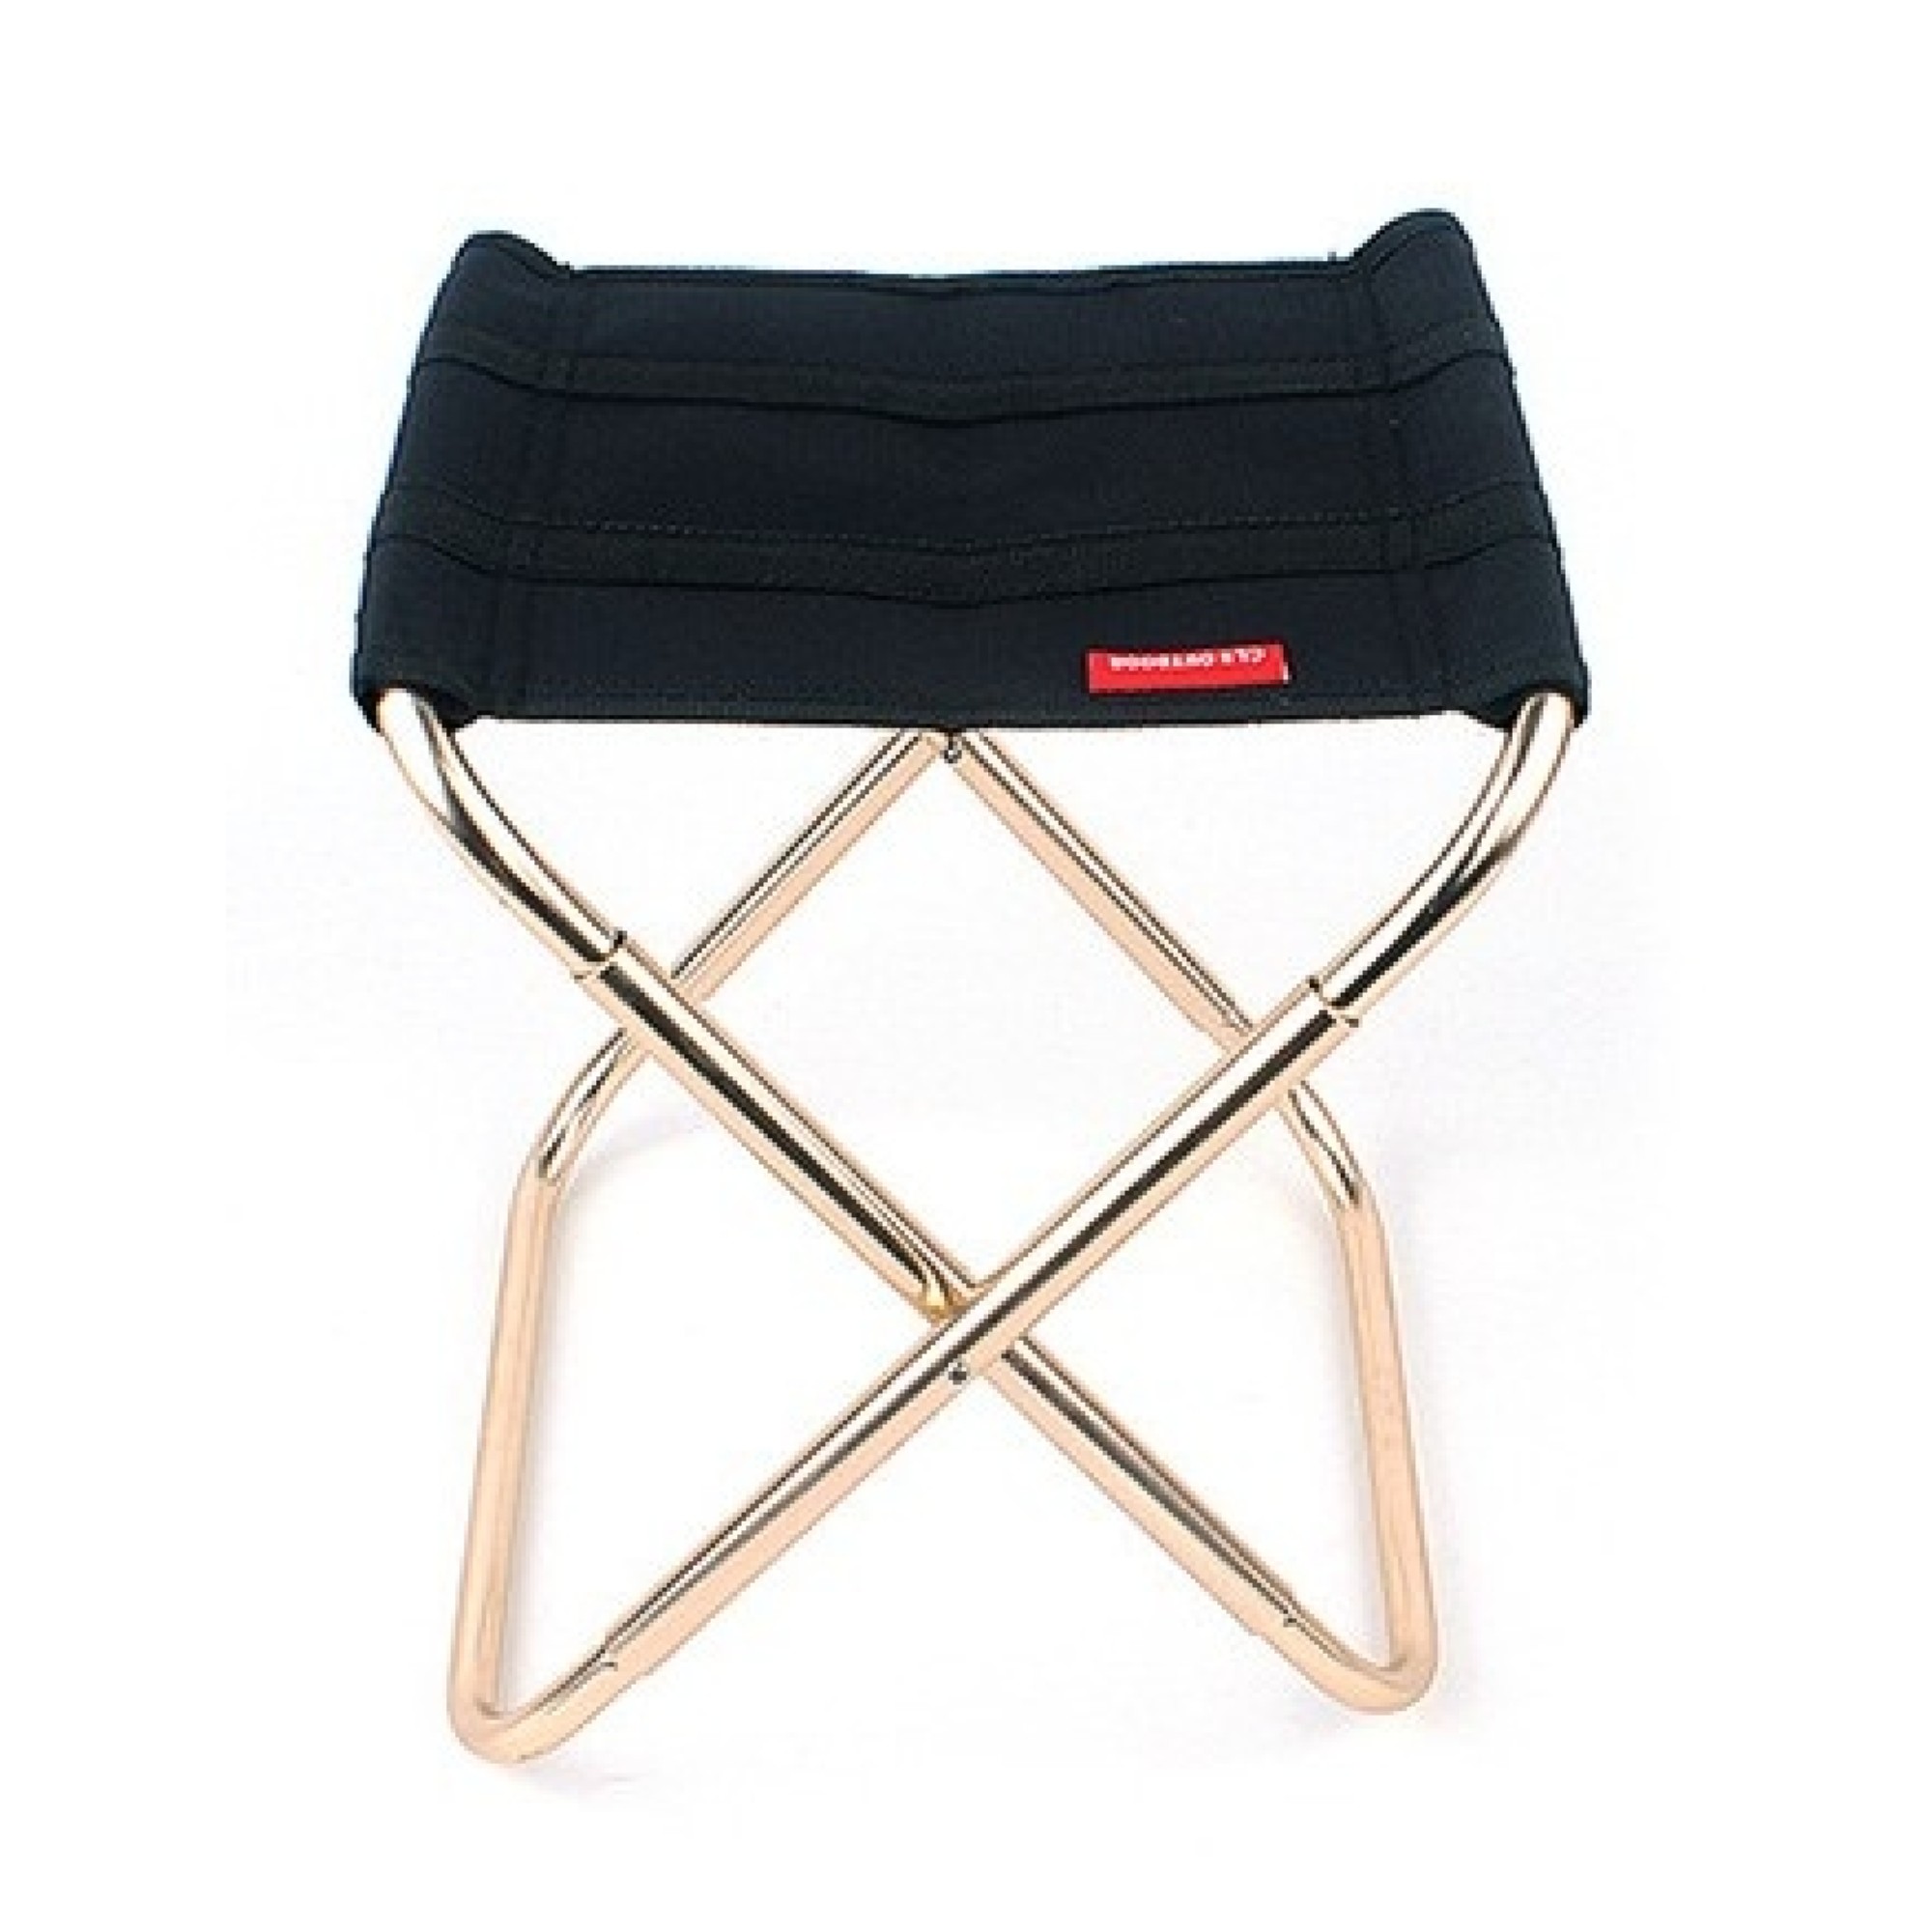 Black camping stool with gold legs